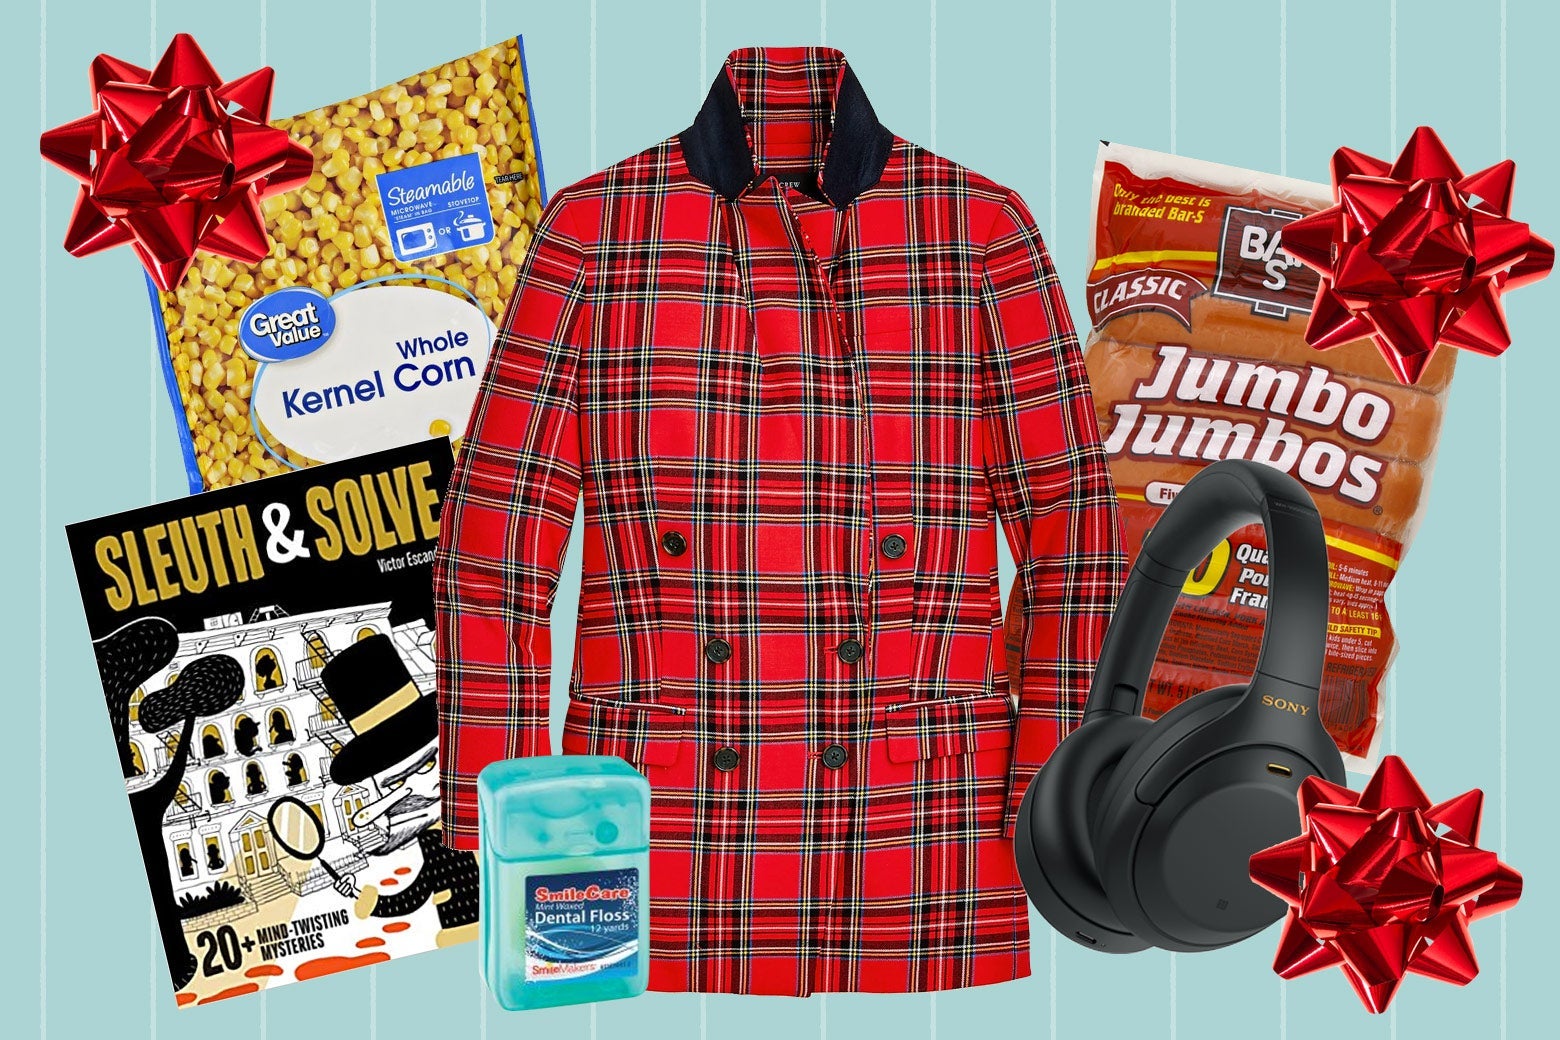 A collage including a plaid women's suit, noise-canceling headphones, dental floss, a book called Sleuth and Solve, a bag of frozen corn, a package of hot dogs, and three red bows around the edges.